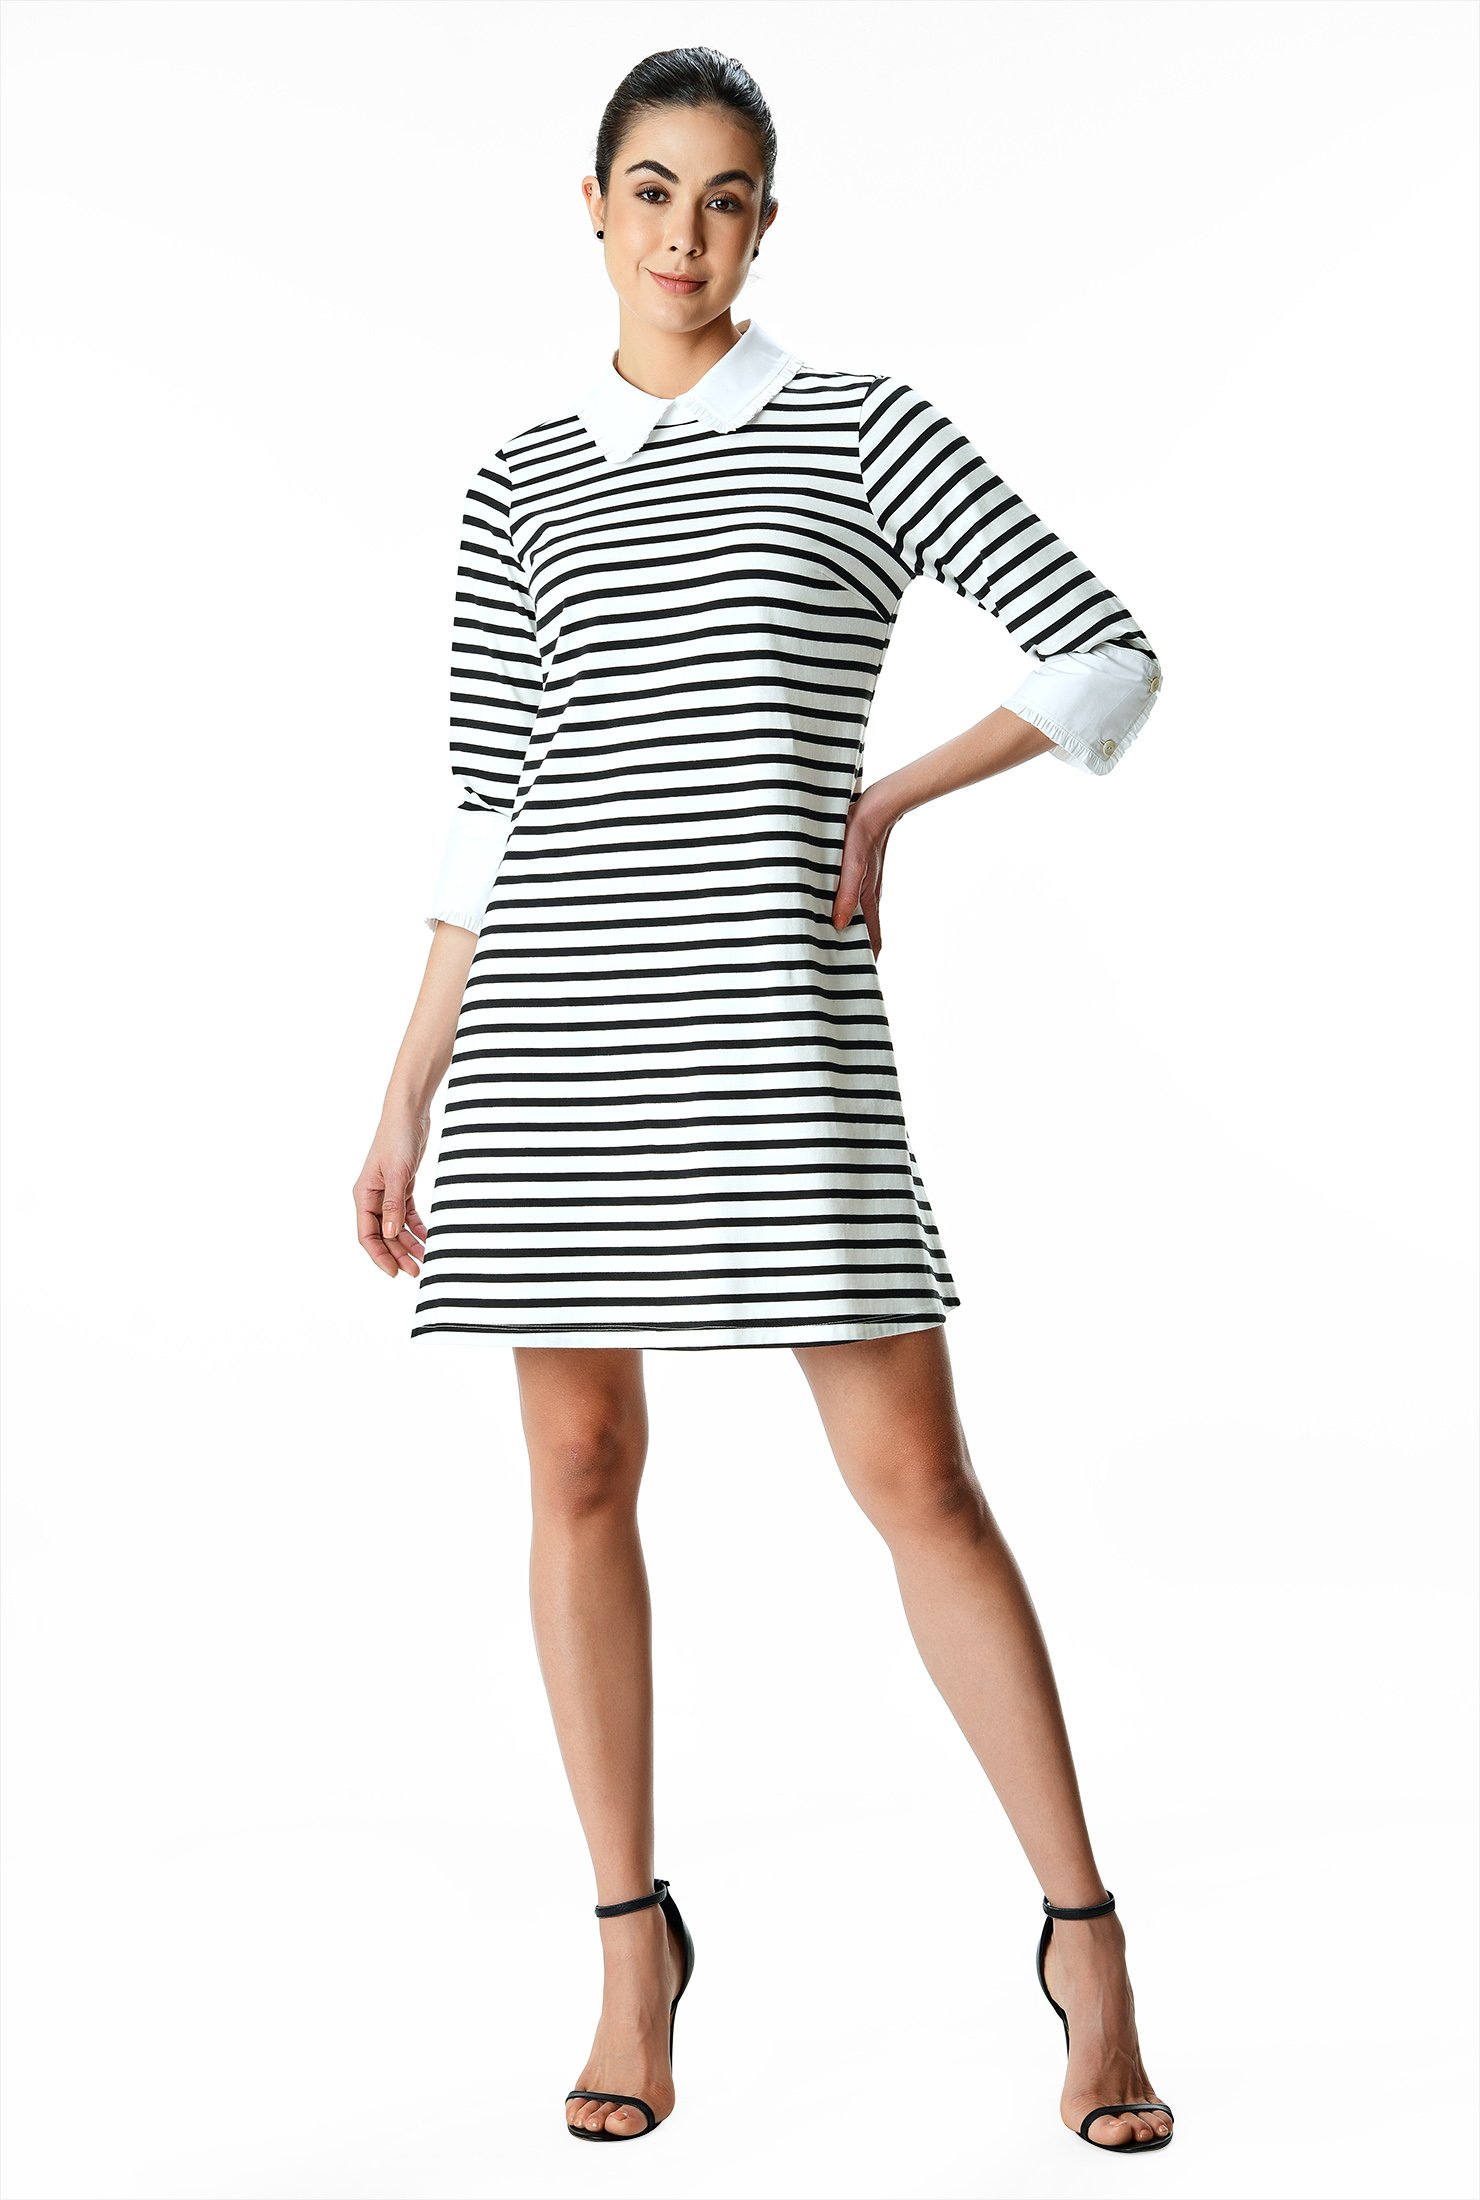 Our polished shift dress with a flared hem in contemporary stripe cotton jersey knit gets an air of retro-chic from a contrast collar and cuffs.